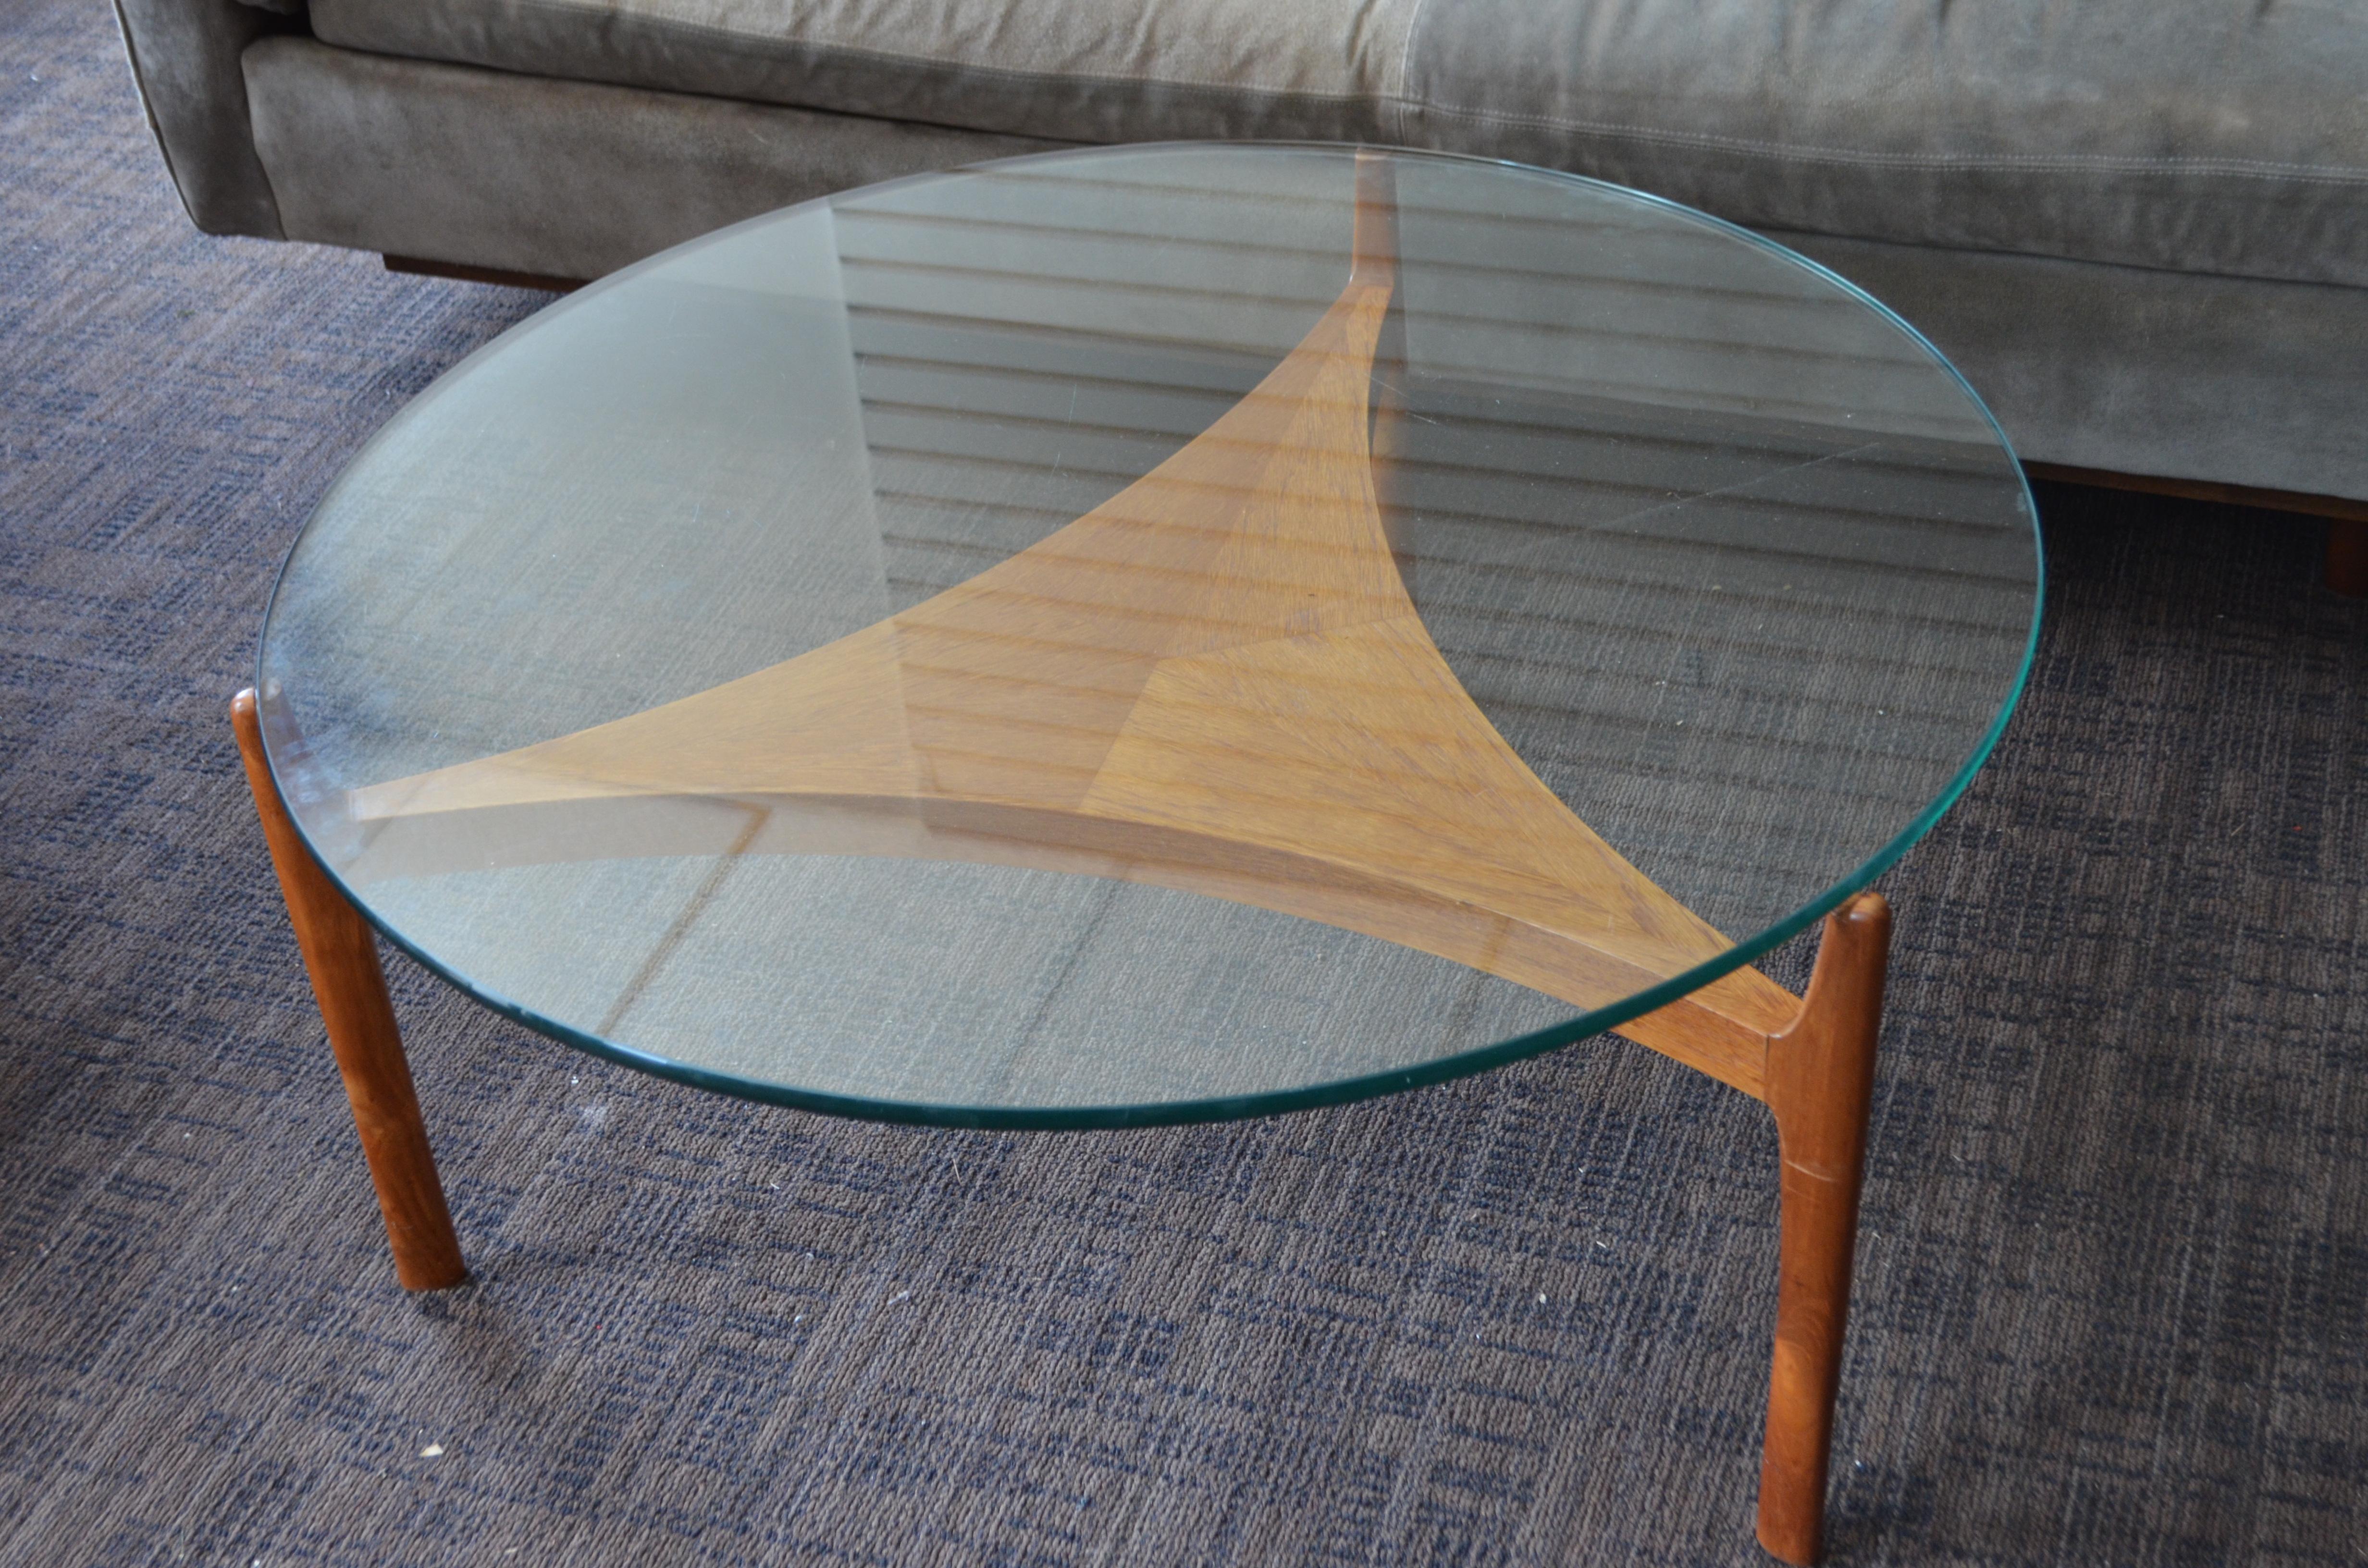 Midcentury Coffee Table with Teak Base and Glass Top Designed by Sven Ellekaer In Good Condition For Sale In Madison, WI